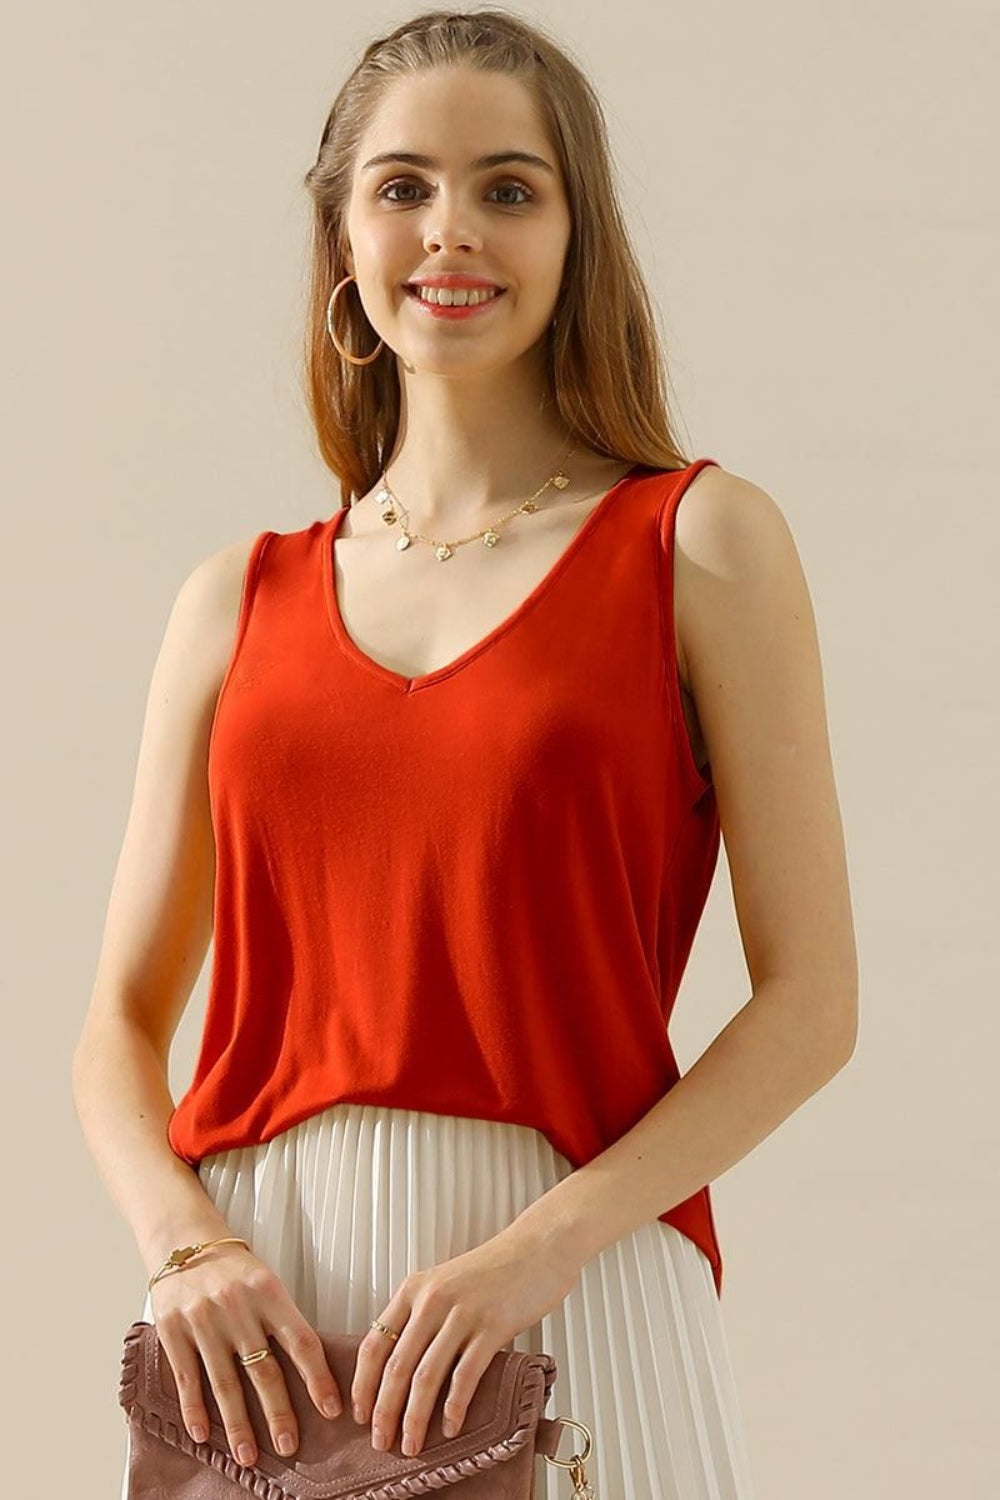 The V-Neck Curved Hem Tank is a stylish and versatile piece. With its flattering neckline and curved hem, it adds a touch of femininity to any outfit. The tank's relaxed fit provides comfort without sacrificing style. S - 3X